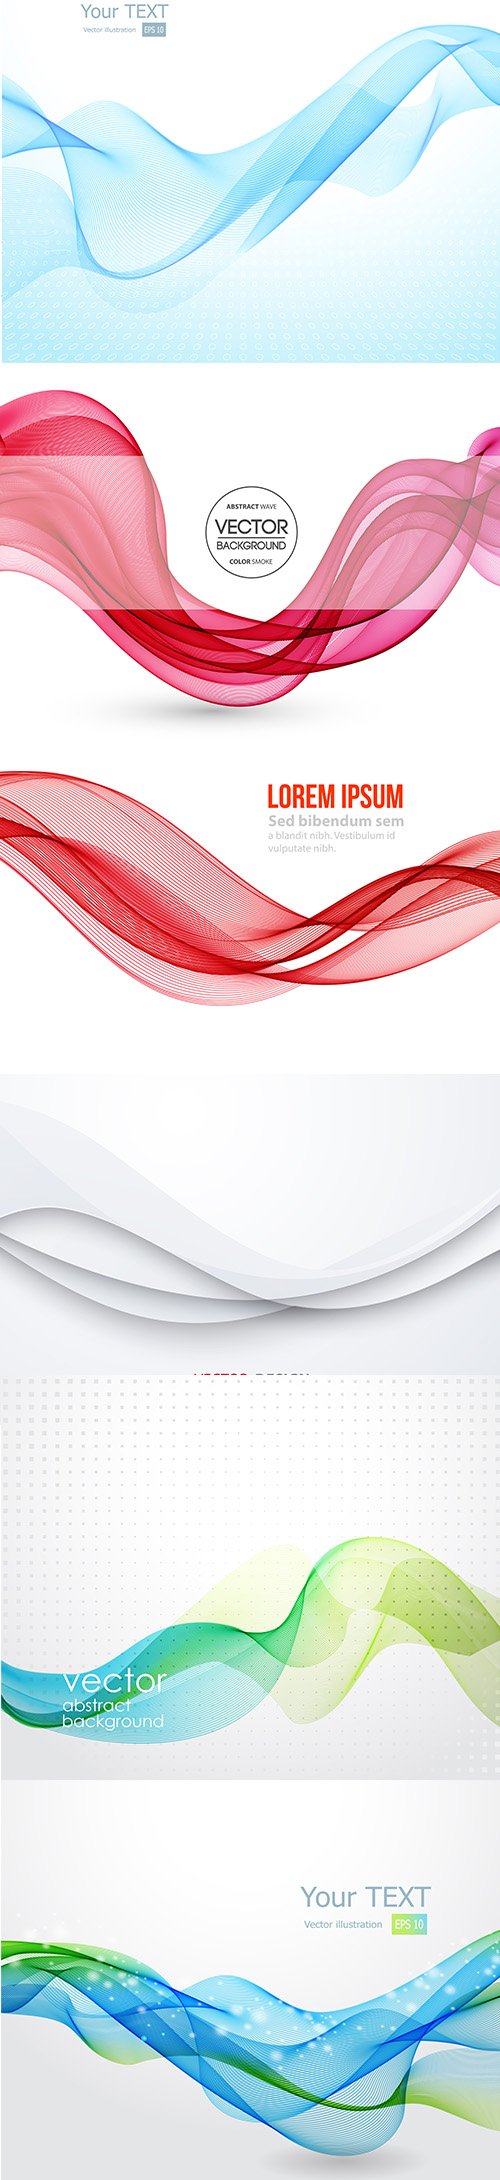 Abstract curved lines Vector background